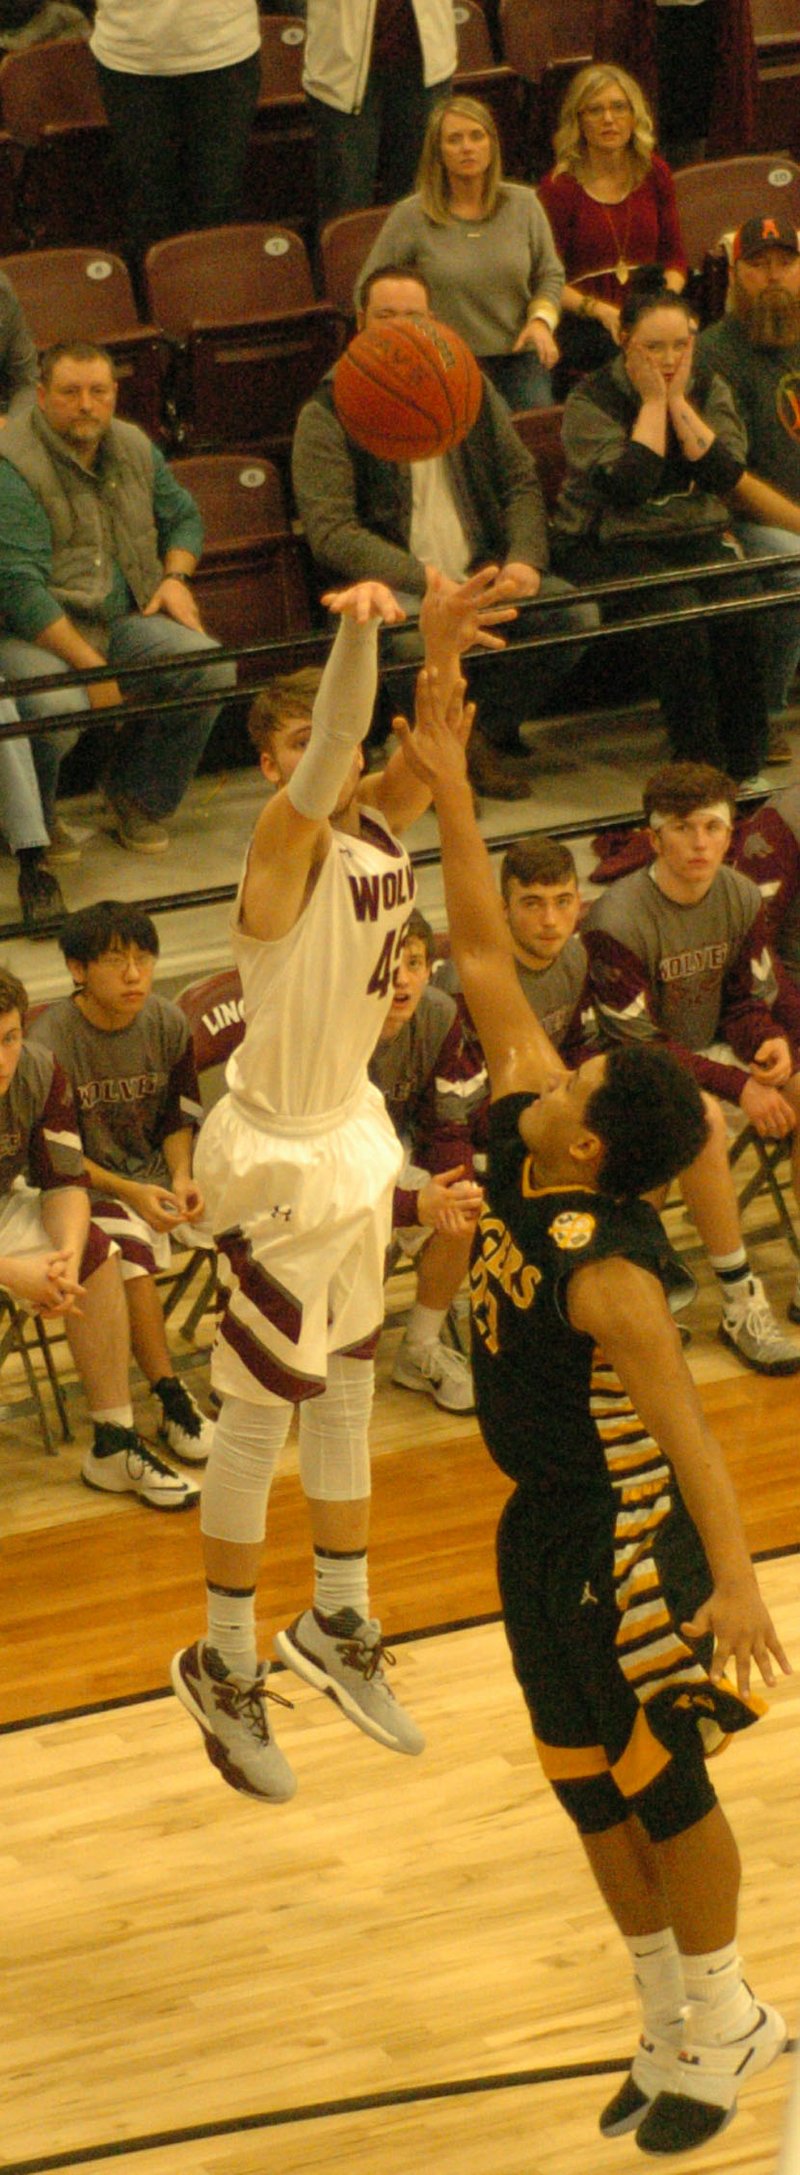 MARK HUMPHREY ENTERPRISE-LEADER Game-winner. Lincoln forward Troy Sugg hit this 3-point shot over a Prairie Grove defender with 9.2 seconds left to lift the Wolves to an exciting 53-52 come-from-behind win at home over the Tigers Friday. Sugg scored all 14 of his points in the second half.